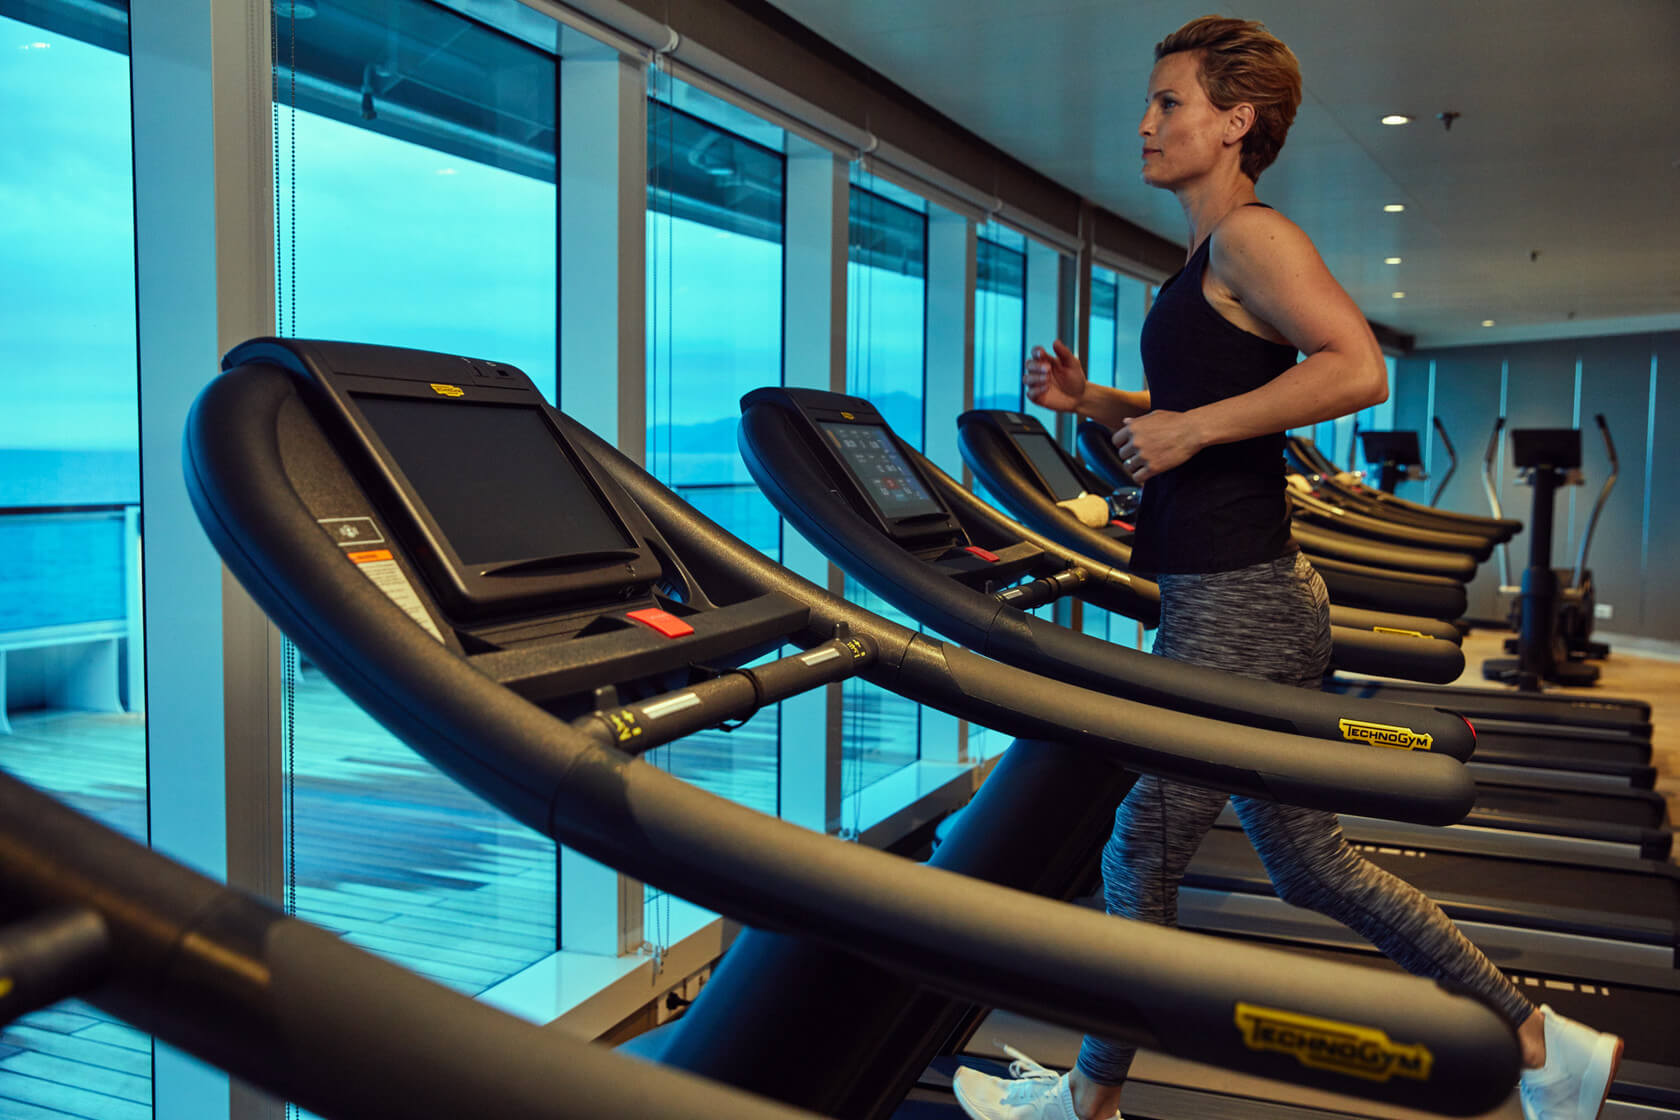 A women on a treadmill inside the Seabourn gym looks out into the ocean view.